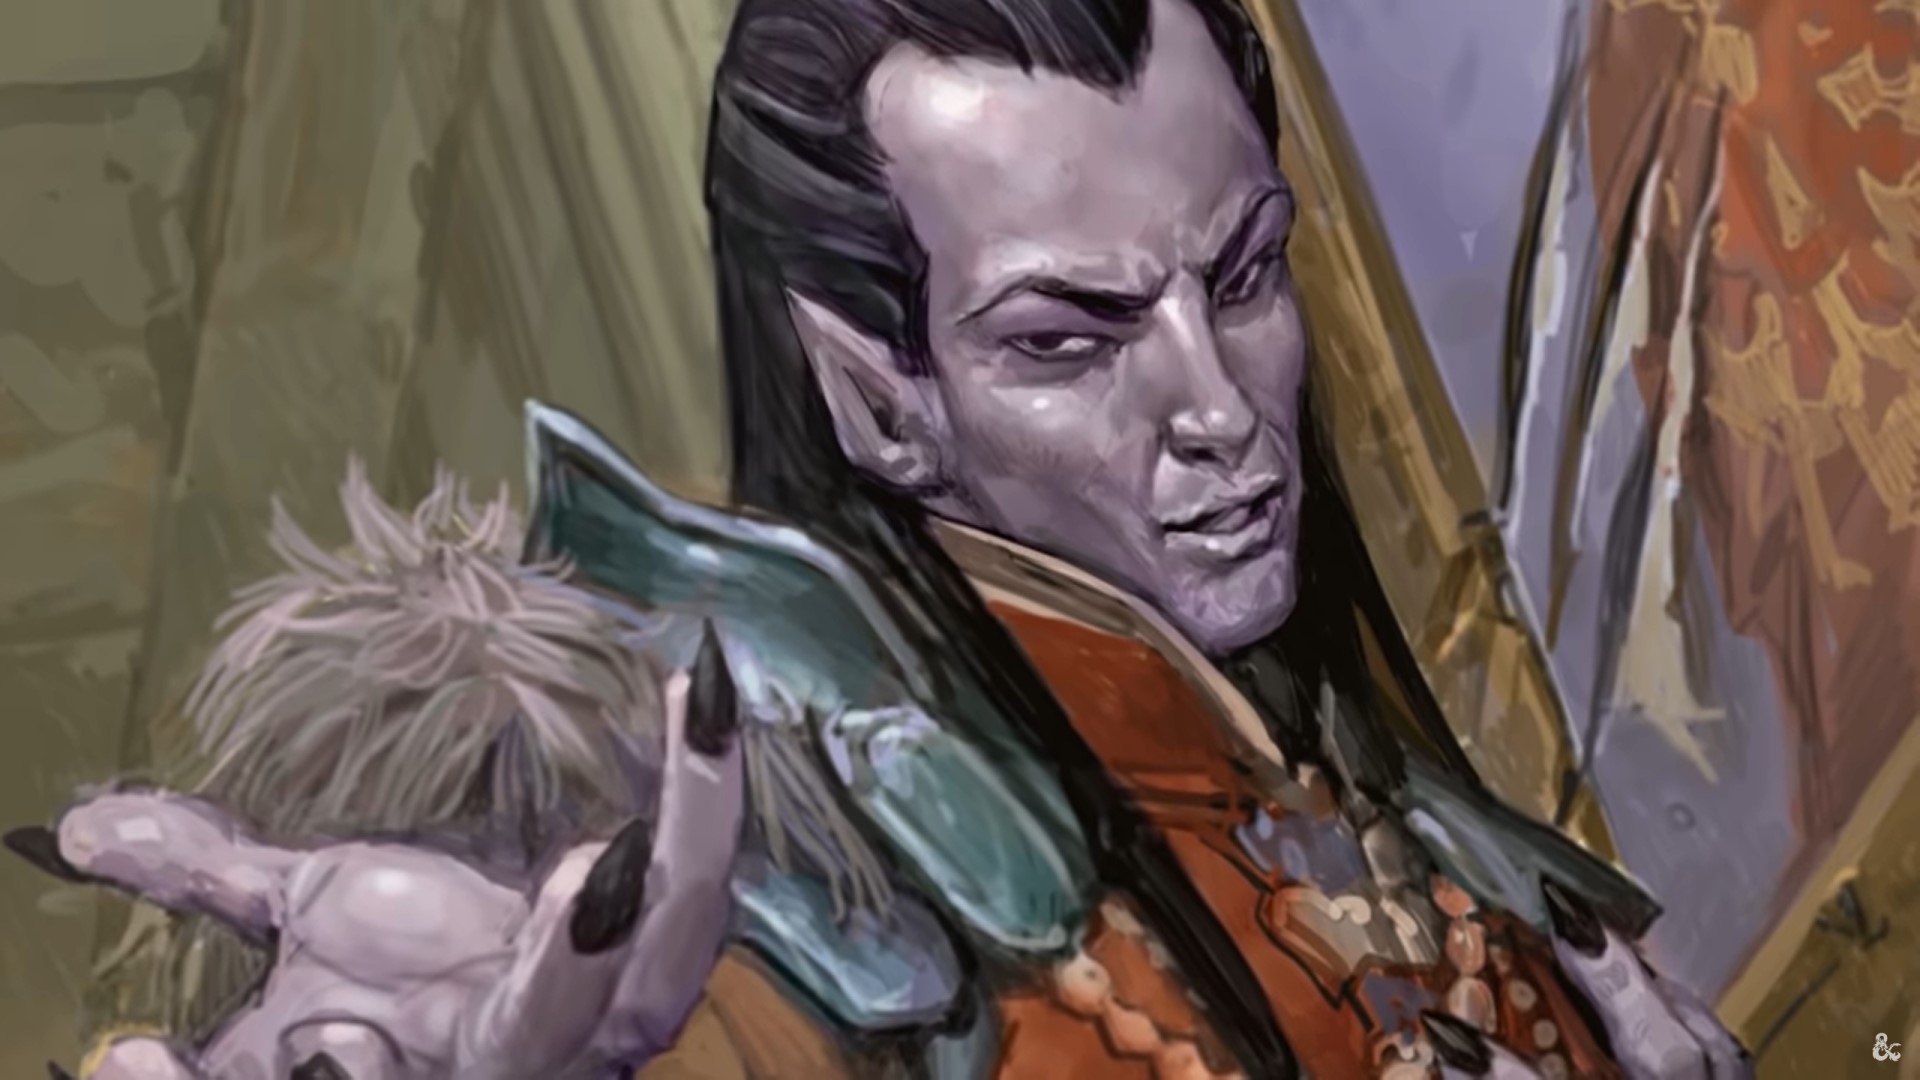 D&D vampire 5e - a vampire extending a pointy-nailed hand, looking sly